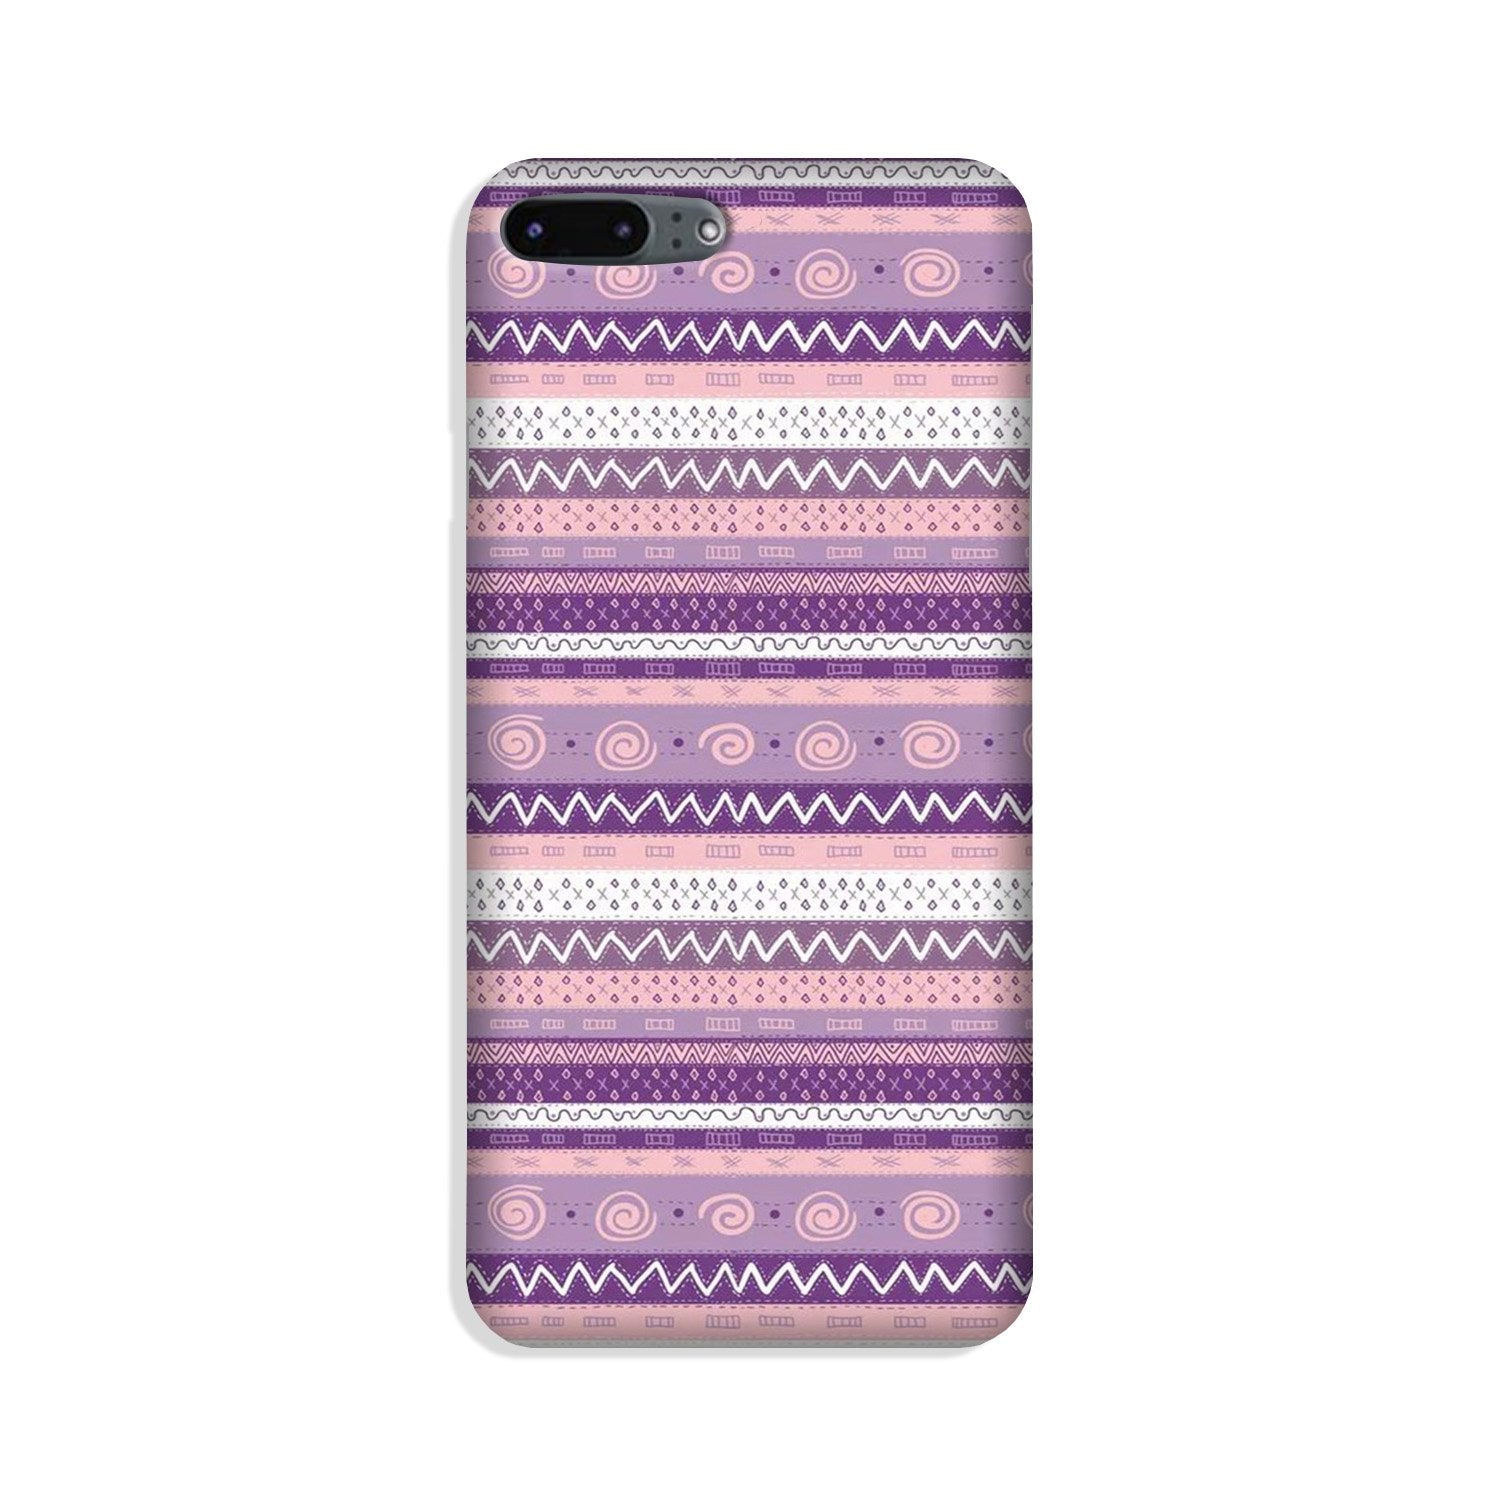 Zigzag line pattern3 Case for iPhone 8 Plus